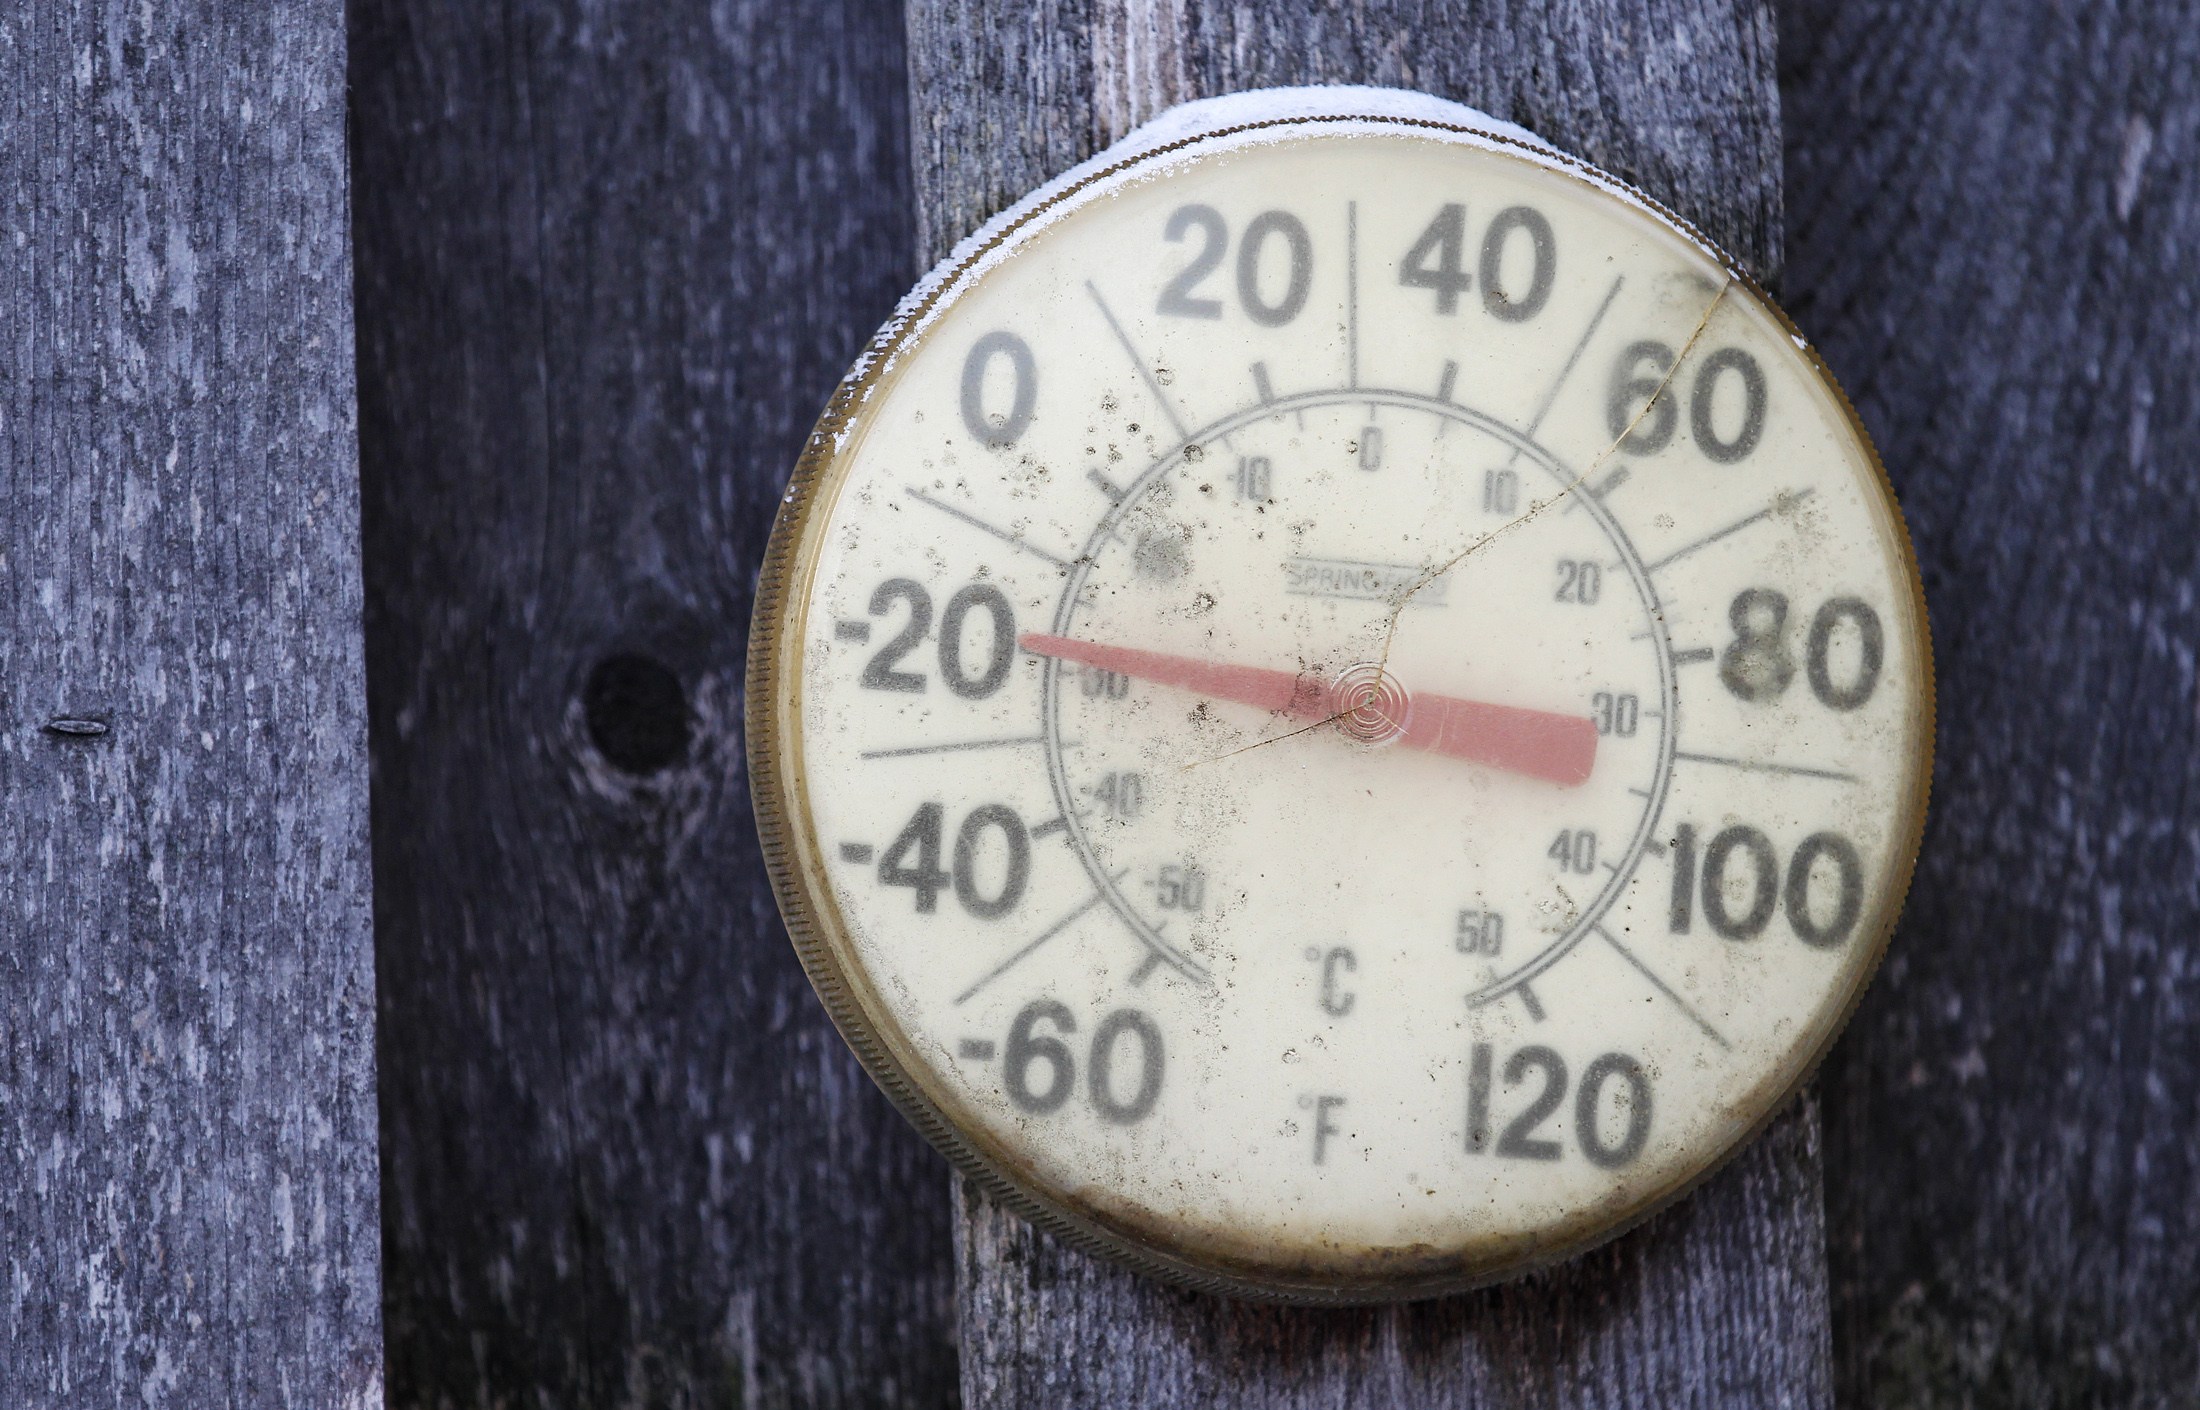 A backyard thermometer shows the temperature during polar vortex in south Minneapolis, Minnesota, U.S. on January 6, 2014.   REUTERS/Eric Miller/File Photo